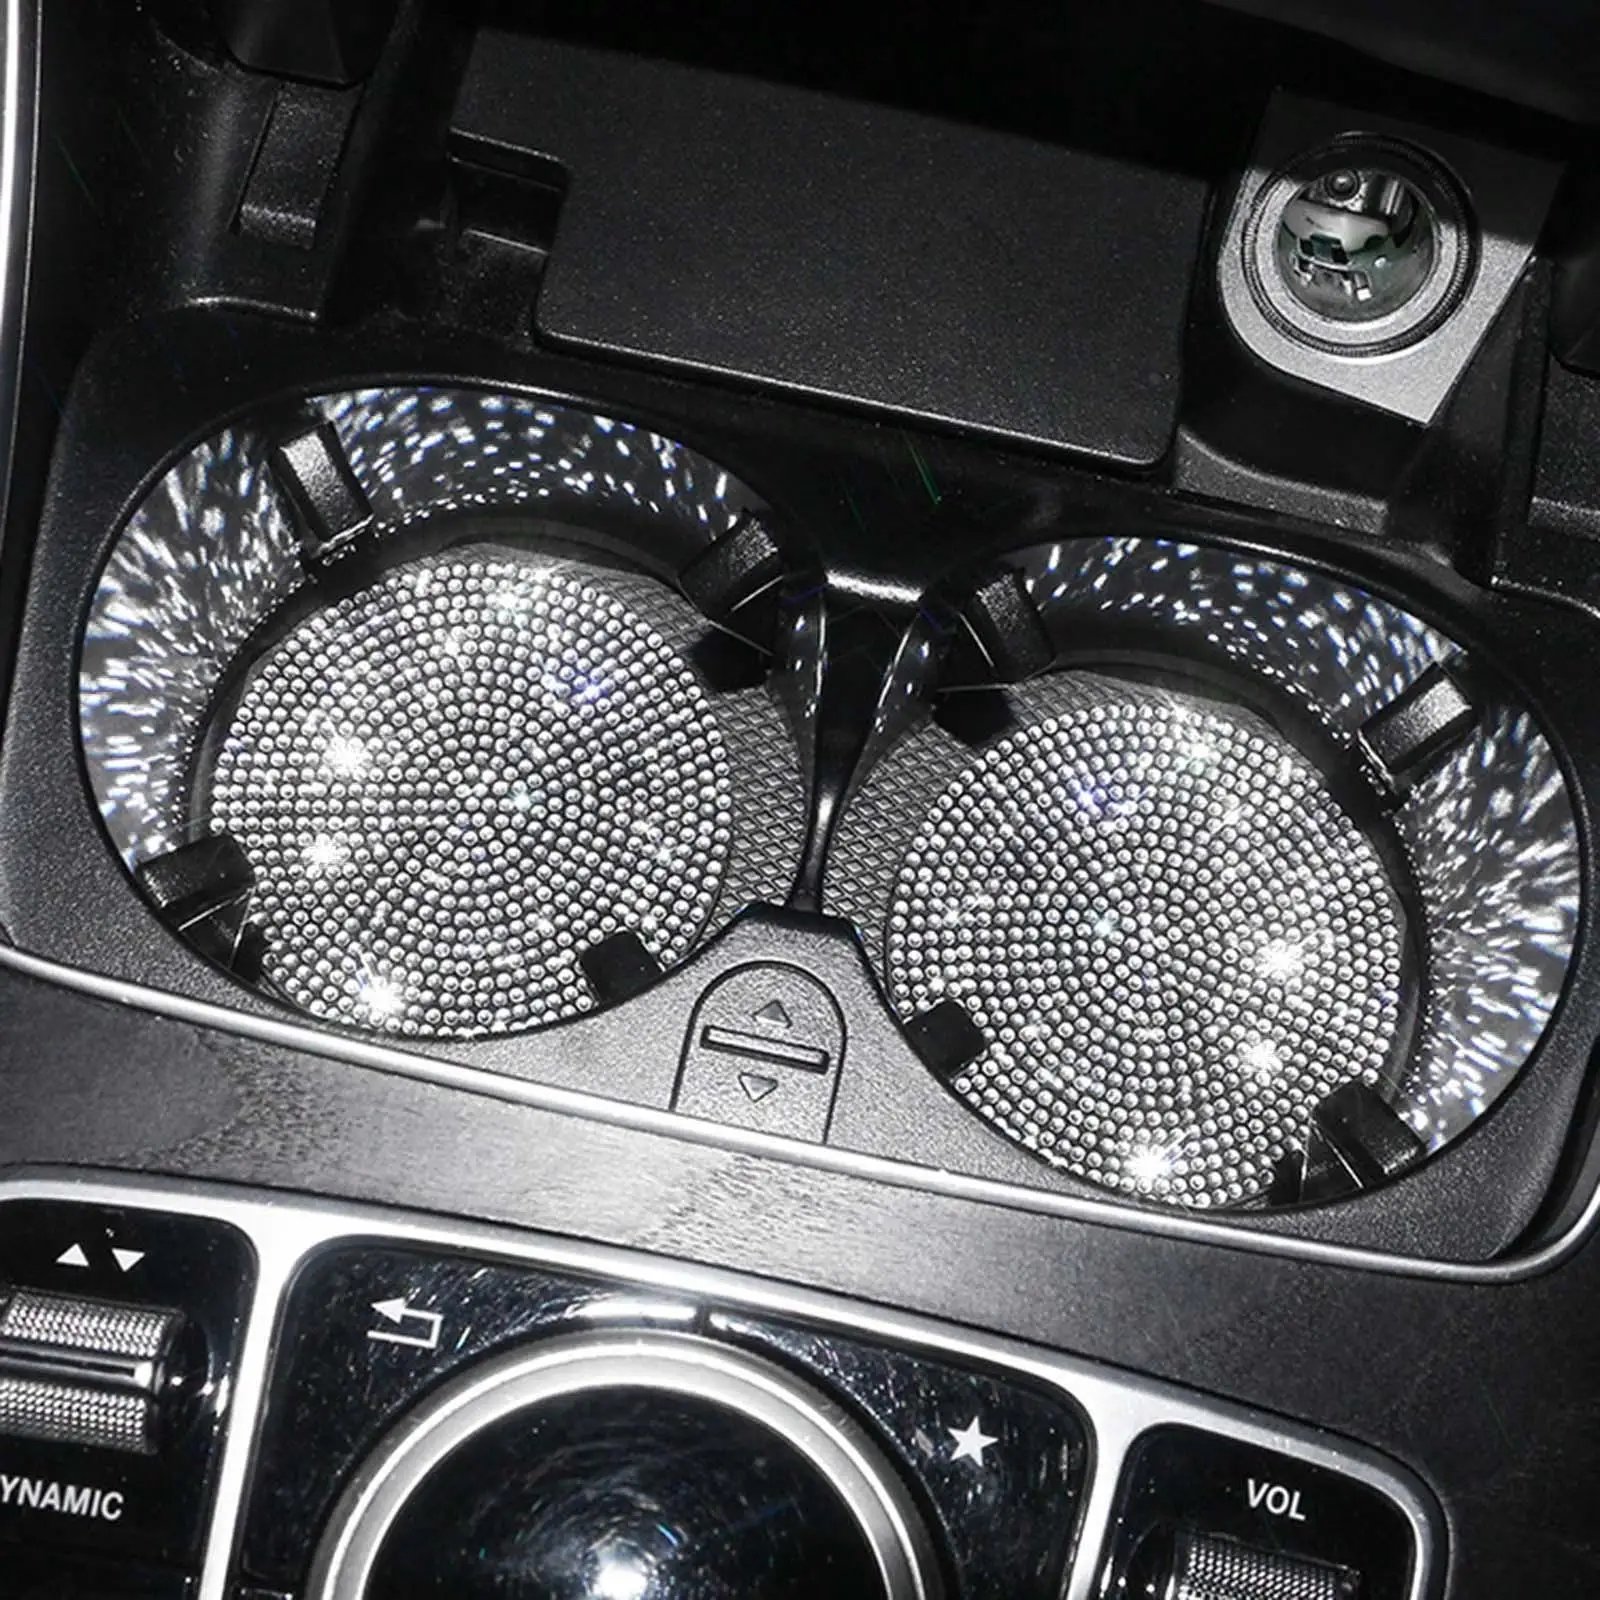 2x Bling Car Cup Holder Coaster Crystal Rhinestone Automobile 2.76 inch Luxury Most Cars Auto Anti Slip Mat Pad for Women Men